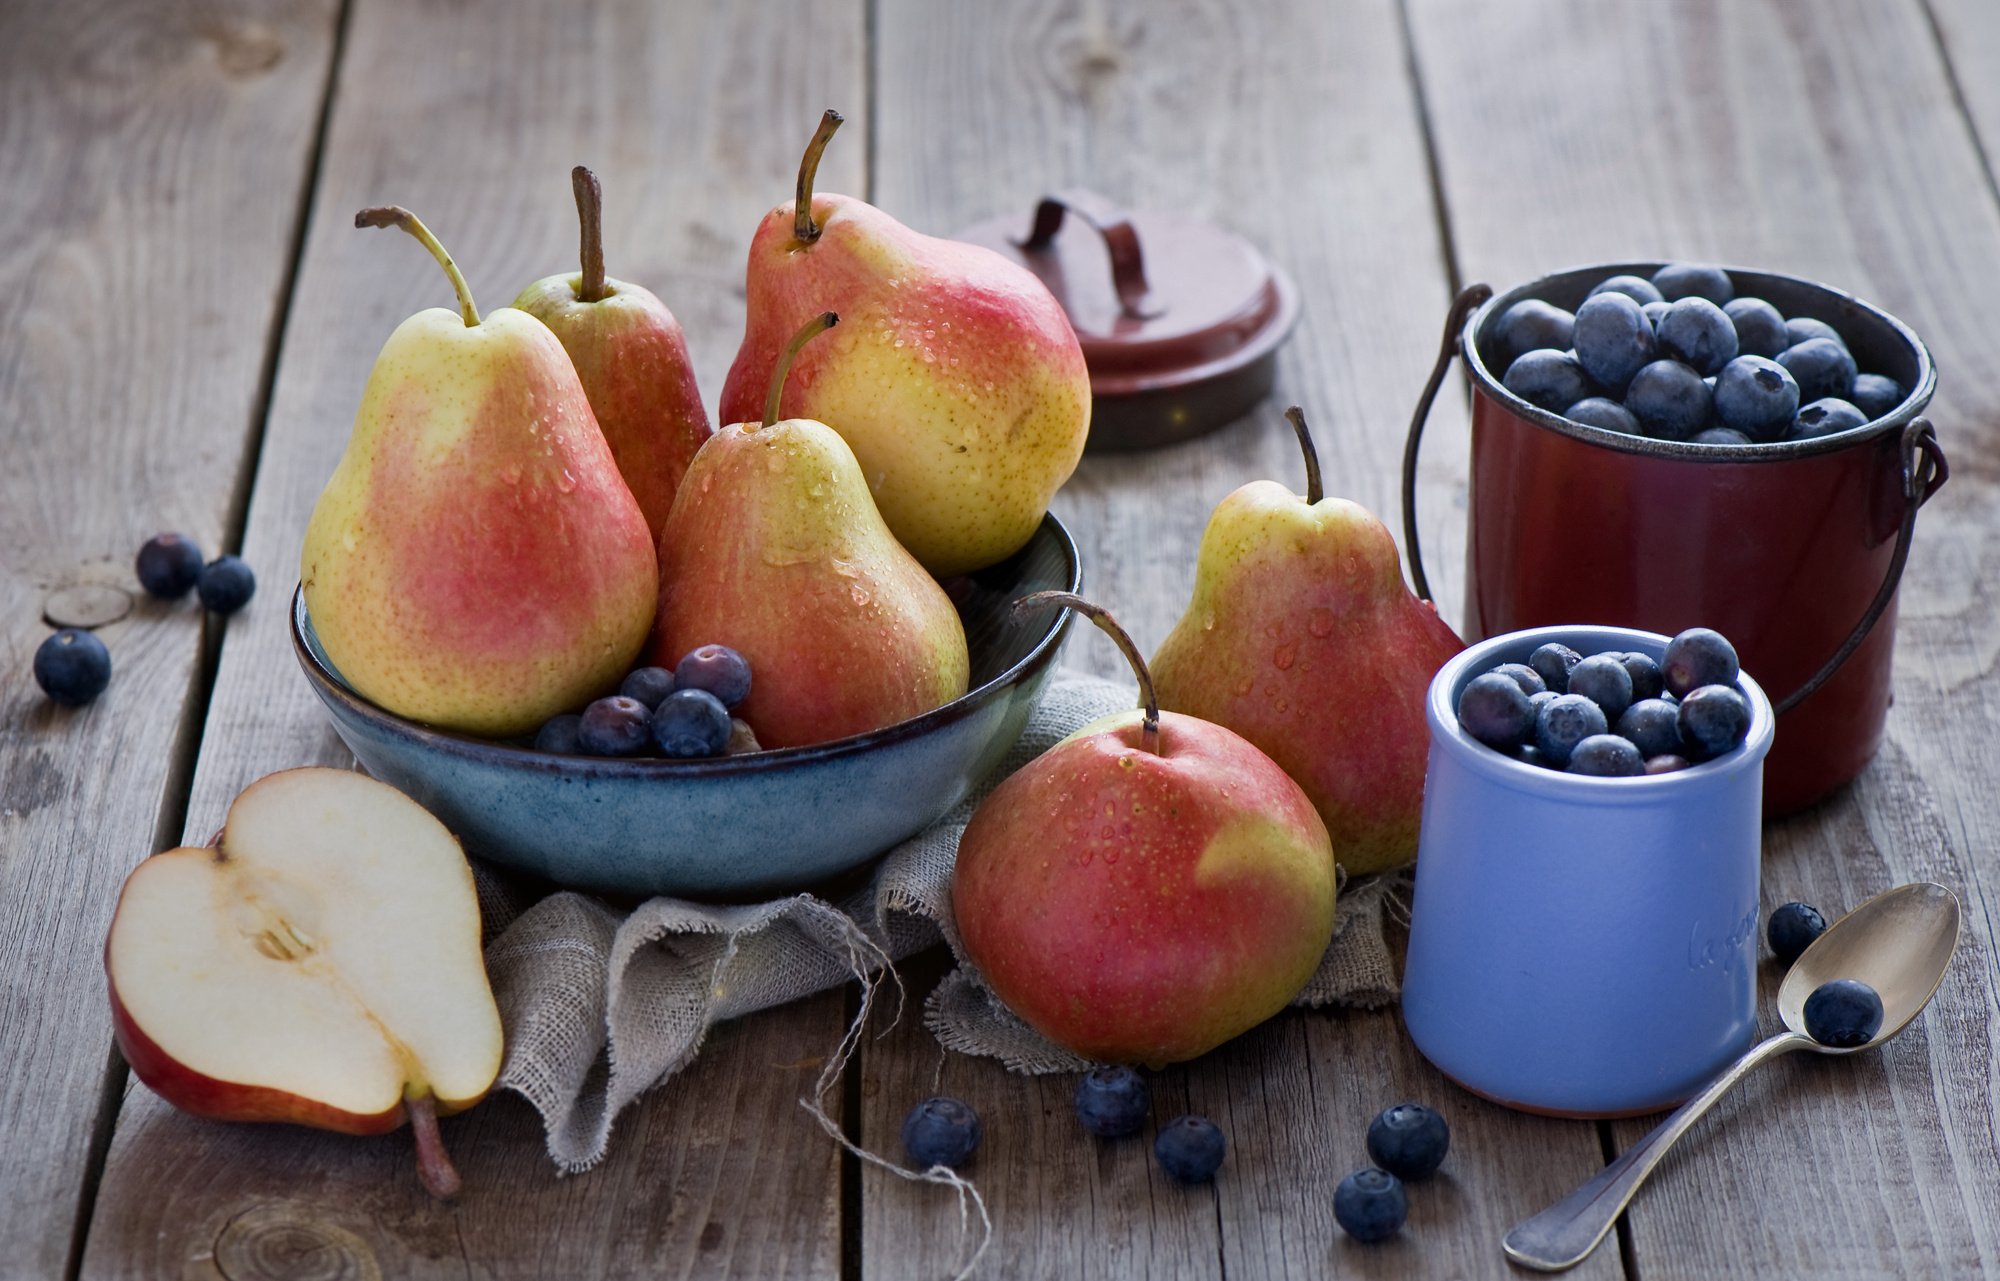 Cool HD Wallpaper fruits, pears, food, blueberry